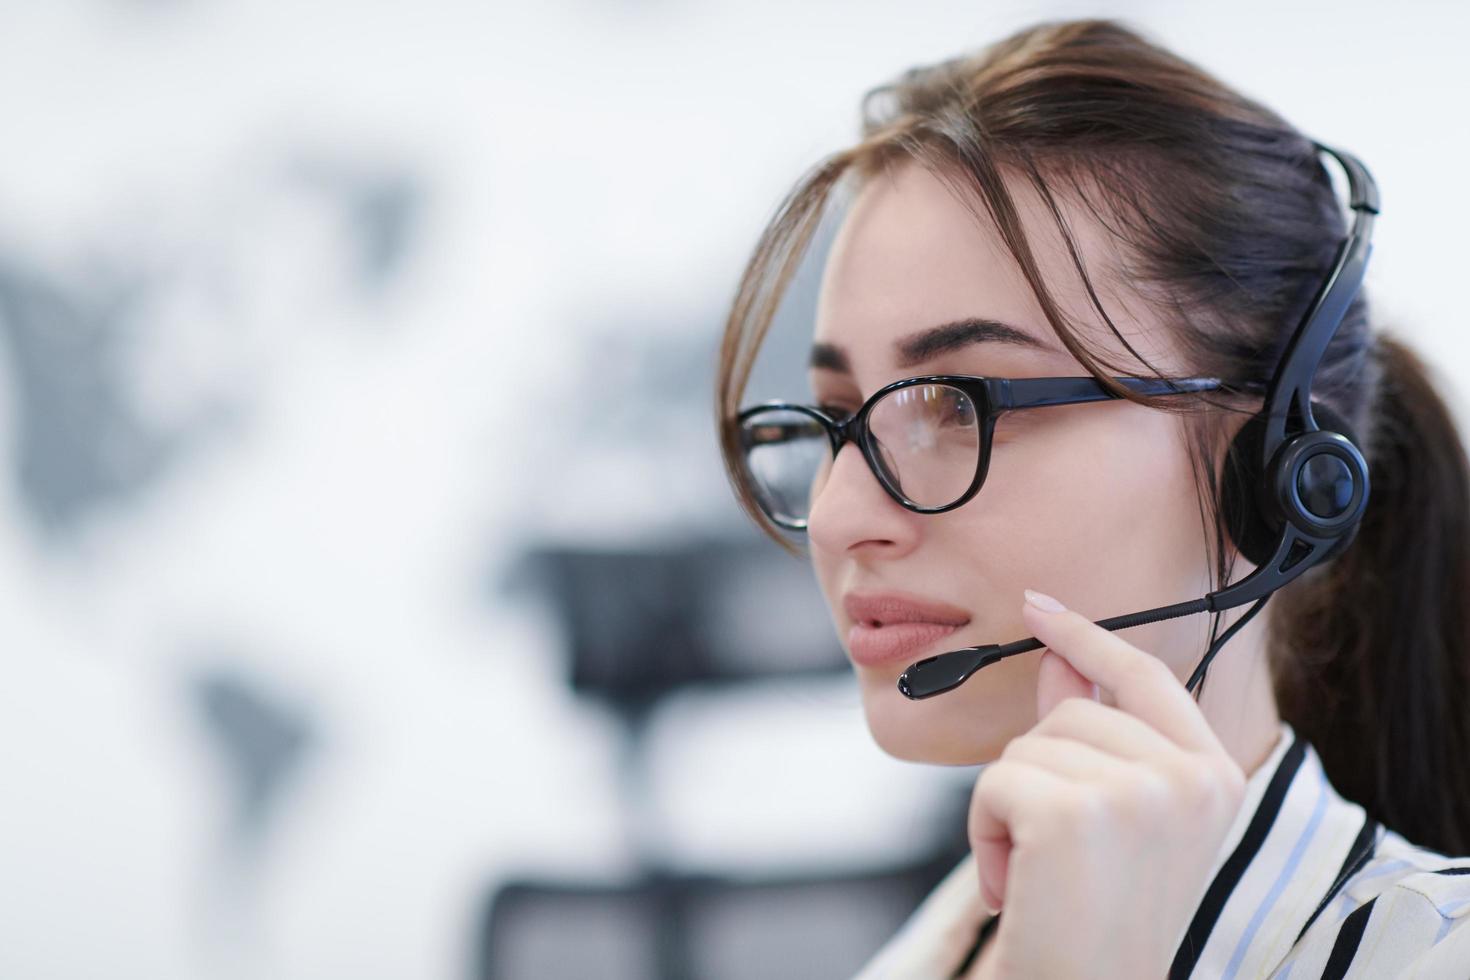 Business woman with headsets at work photo